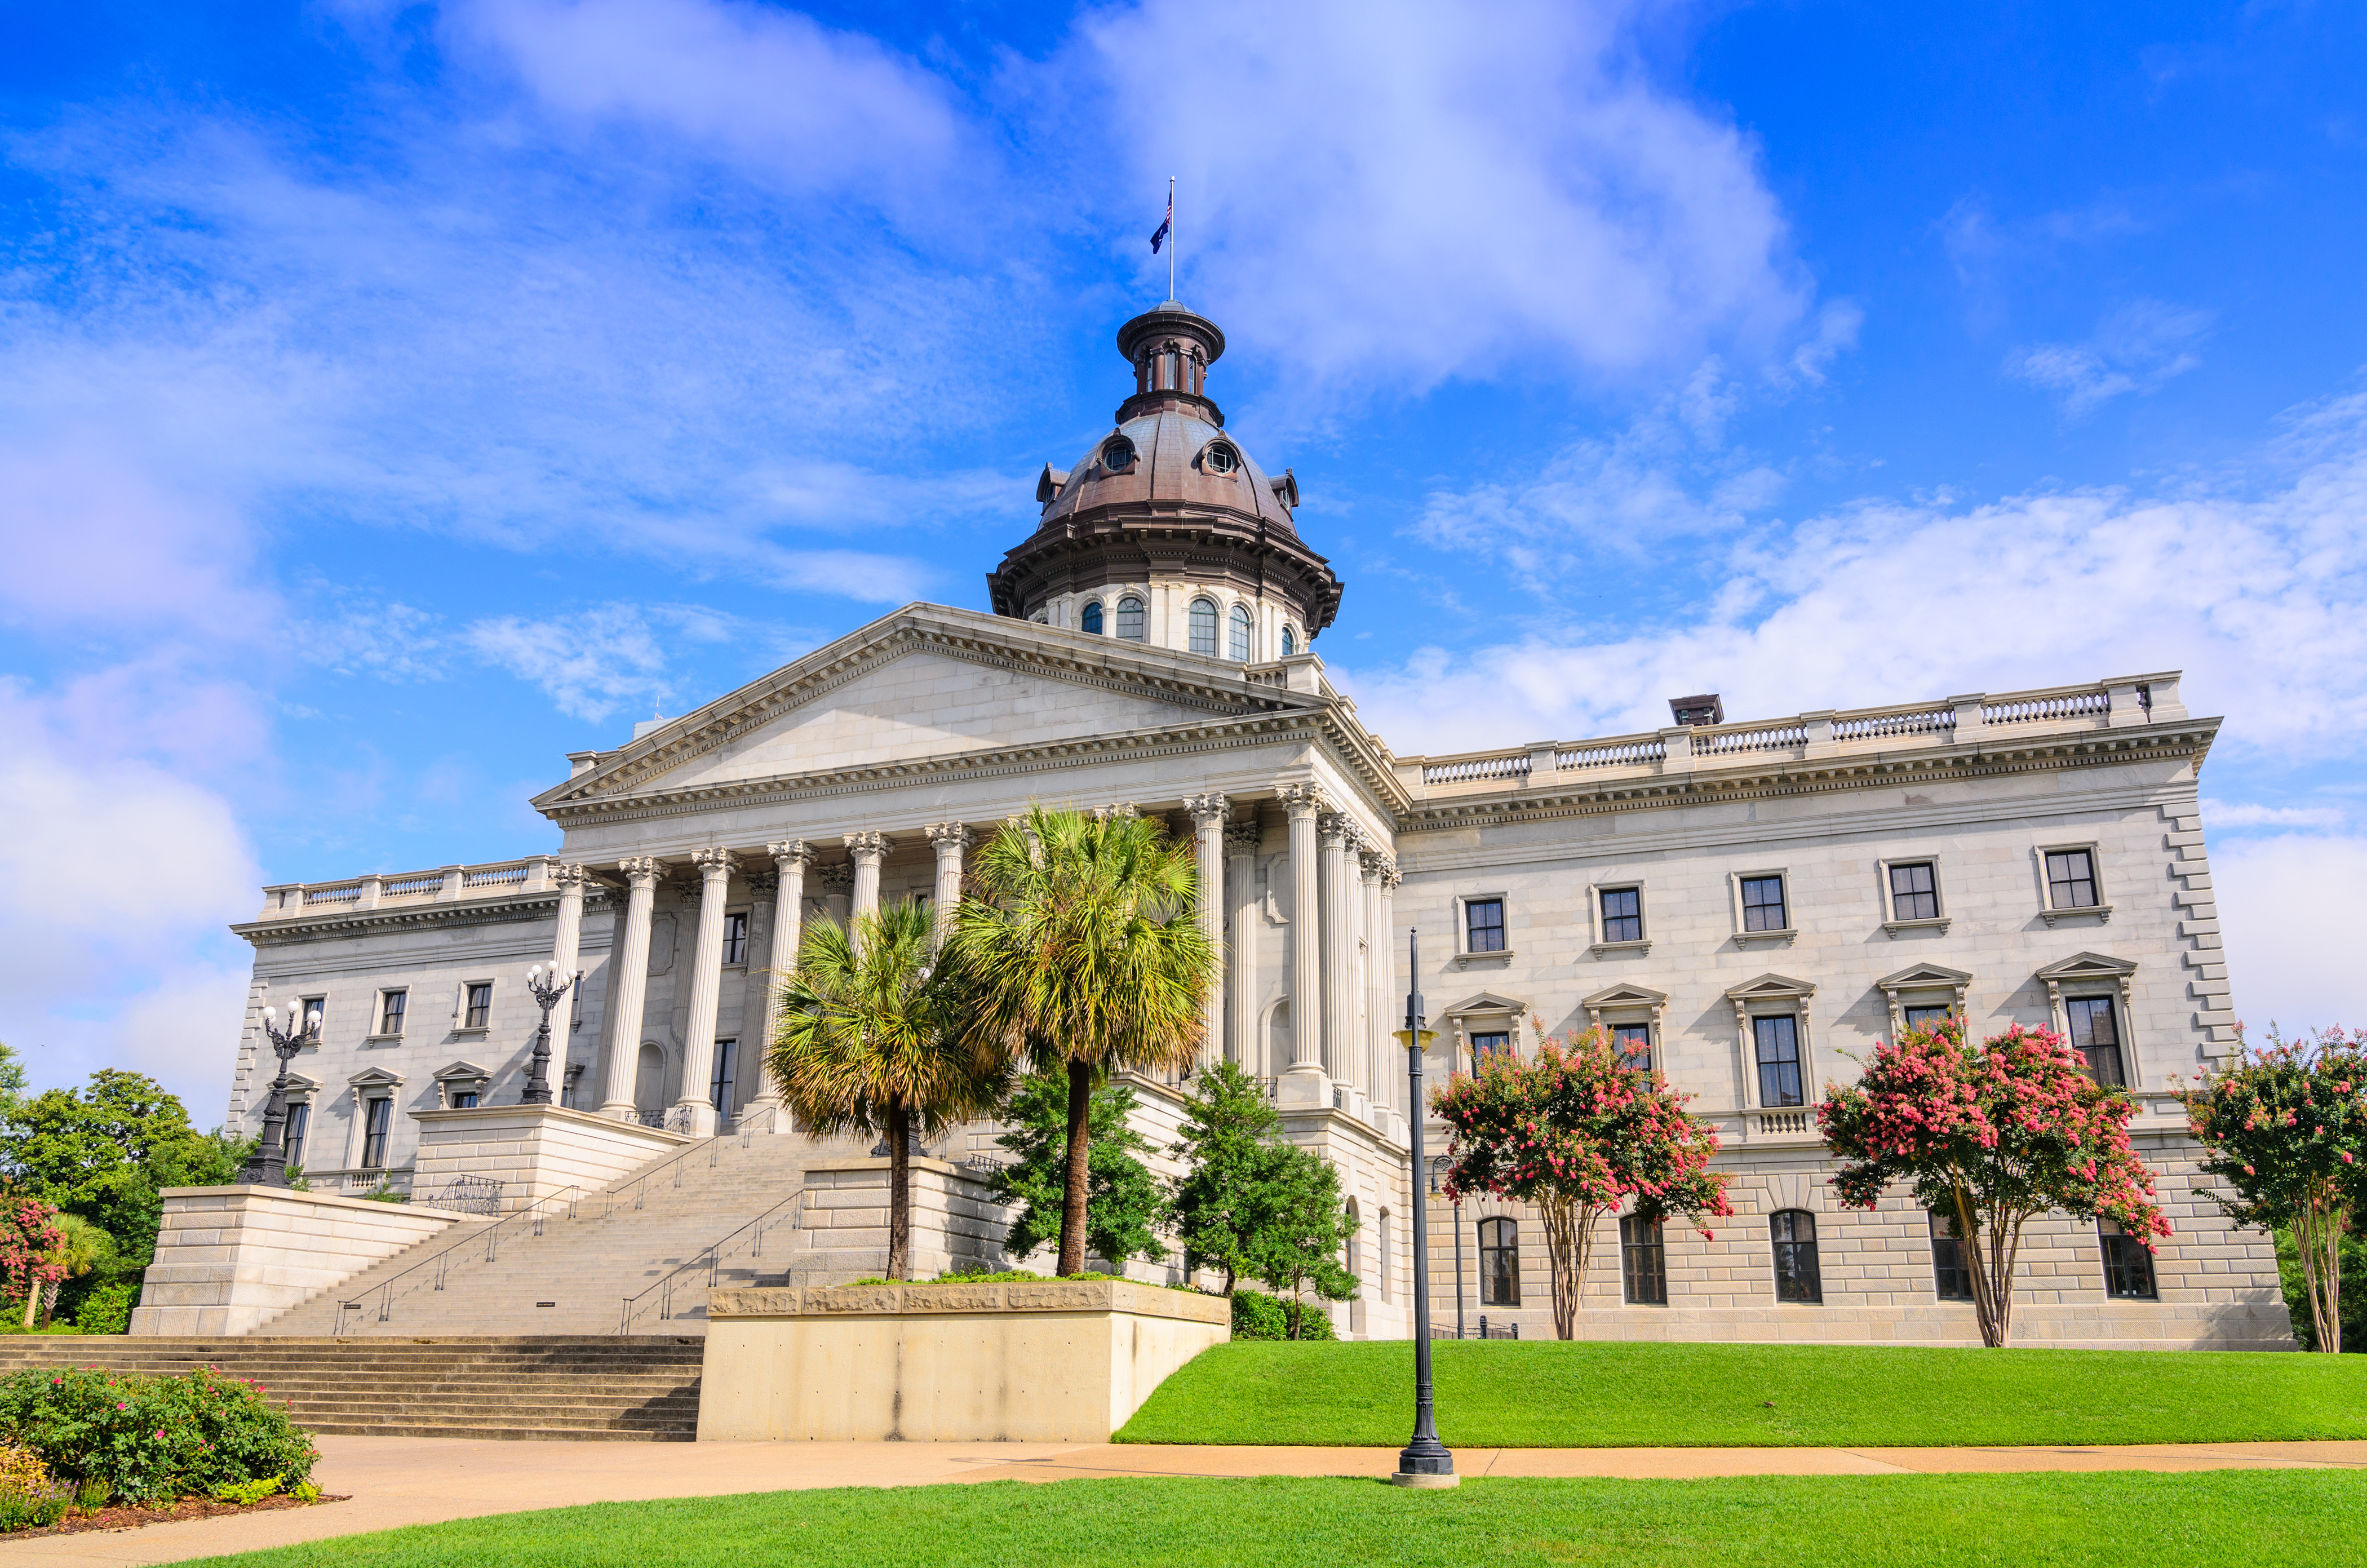 State Capitol Building in Columbia South Carolina